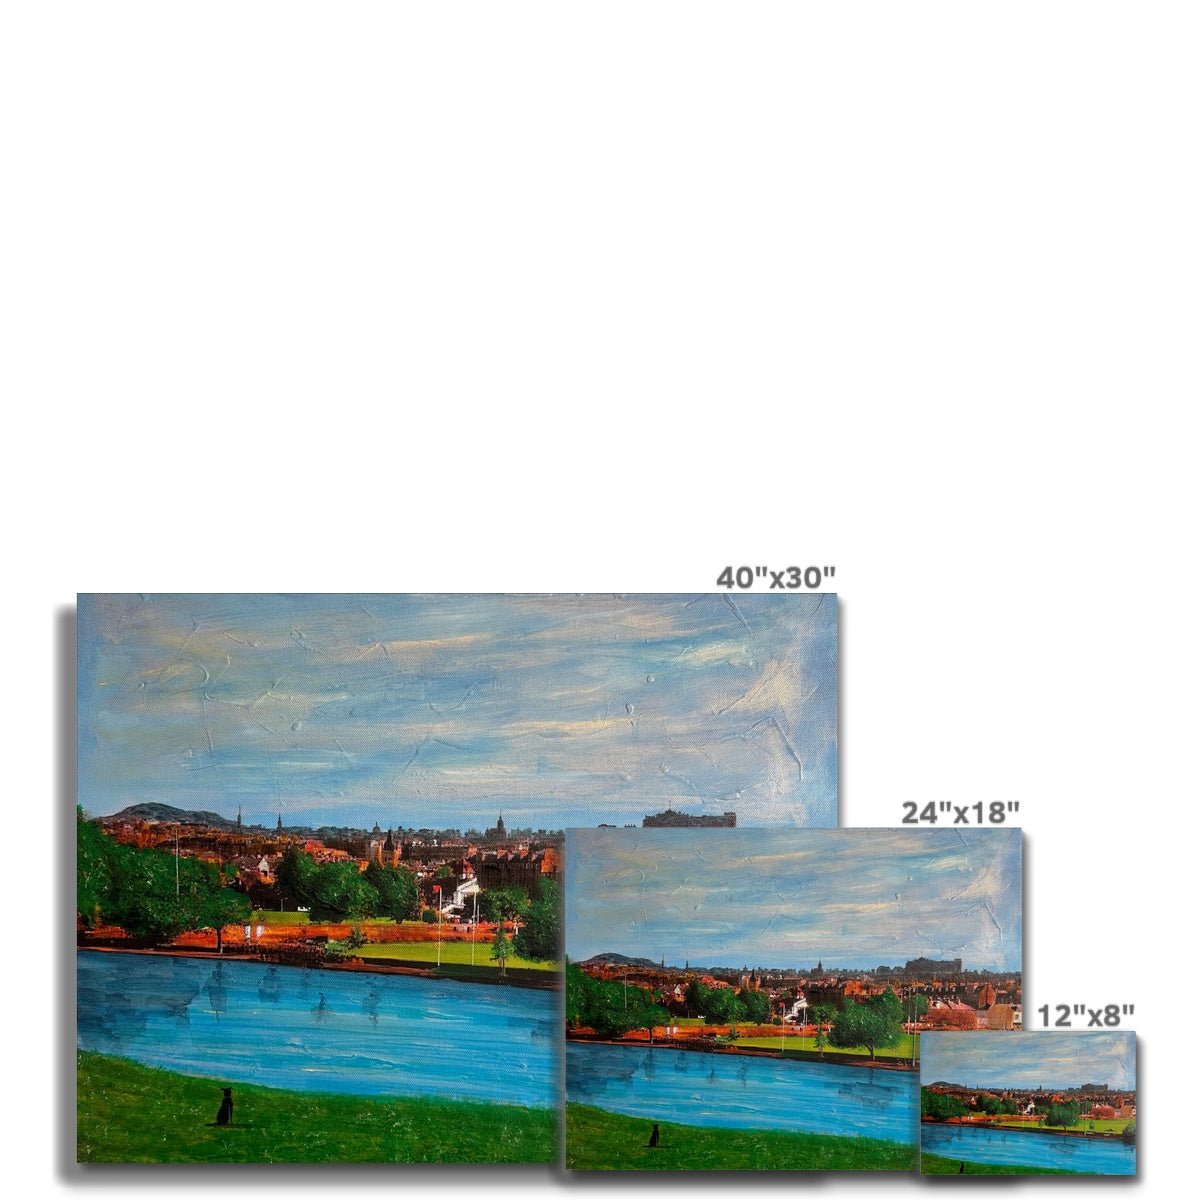 Edinburgh Painting | Canvas From Scotland-Contemporary Stretched Canvas Prints-Edinburgh & Glasgow Art Gallery-Paintings, Prints, Homeware, Art Gifts From Scotland By Scottish Artist Kevin Hunter